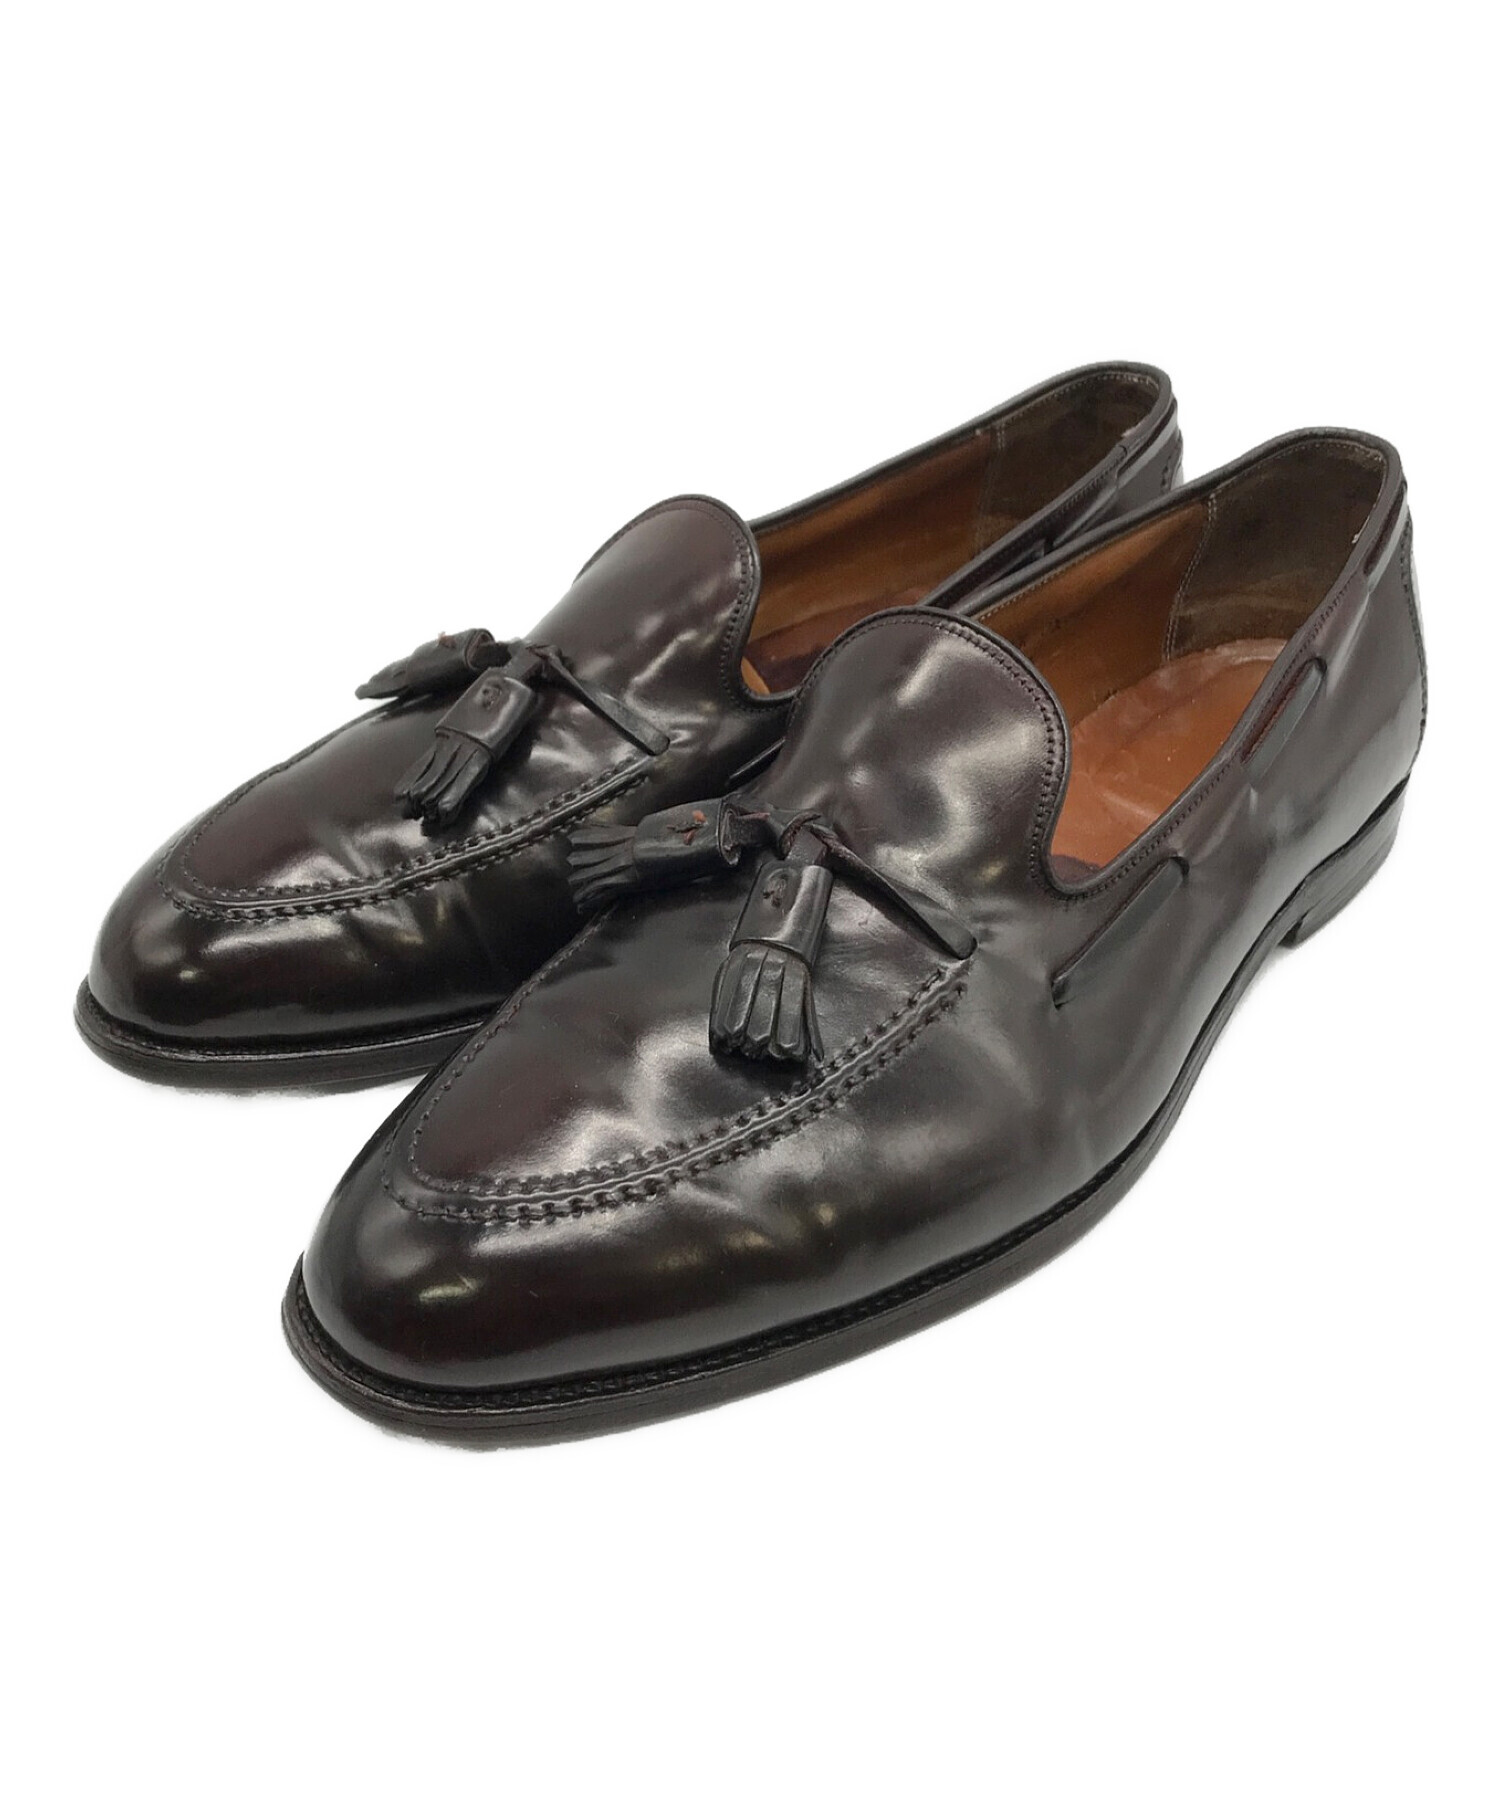 Brooks Brothers Tassel Loafers by Alden ブルックスブラザーズ 